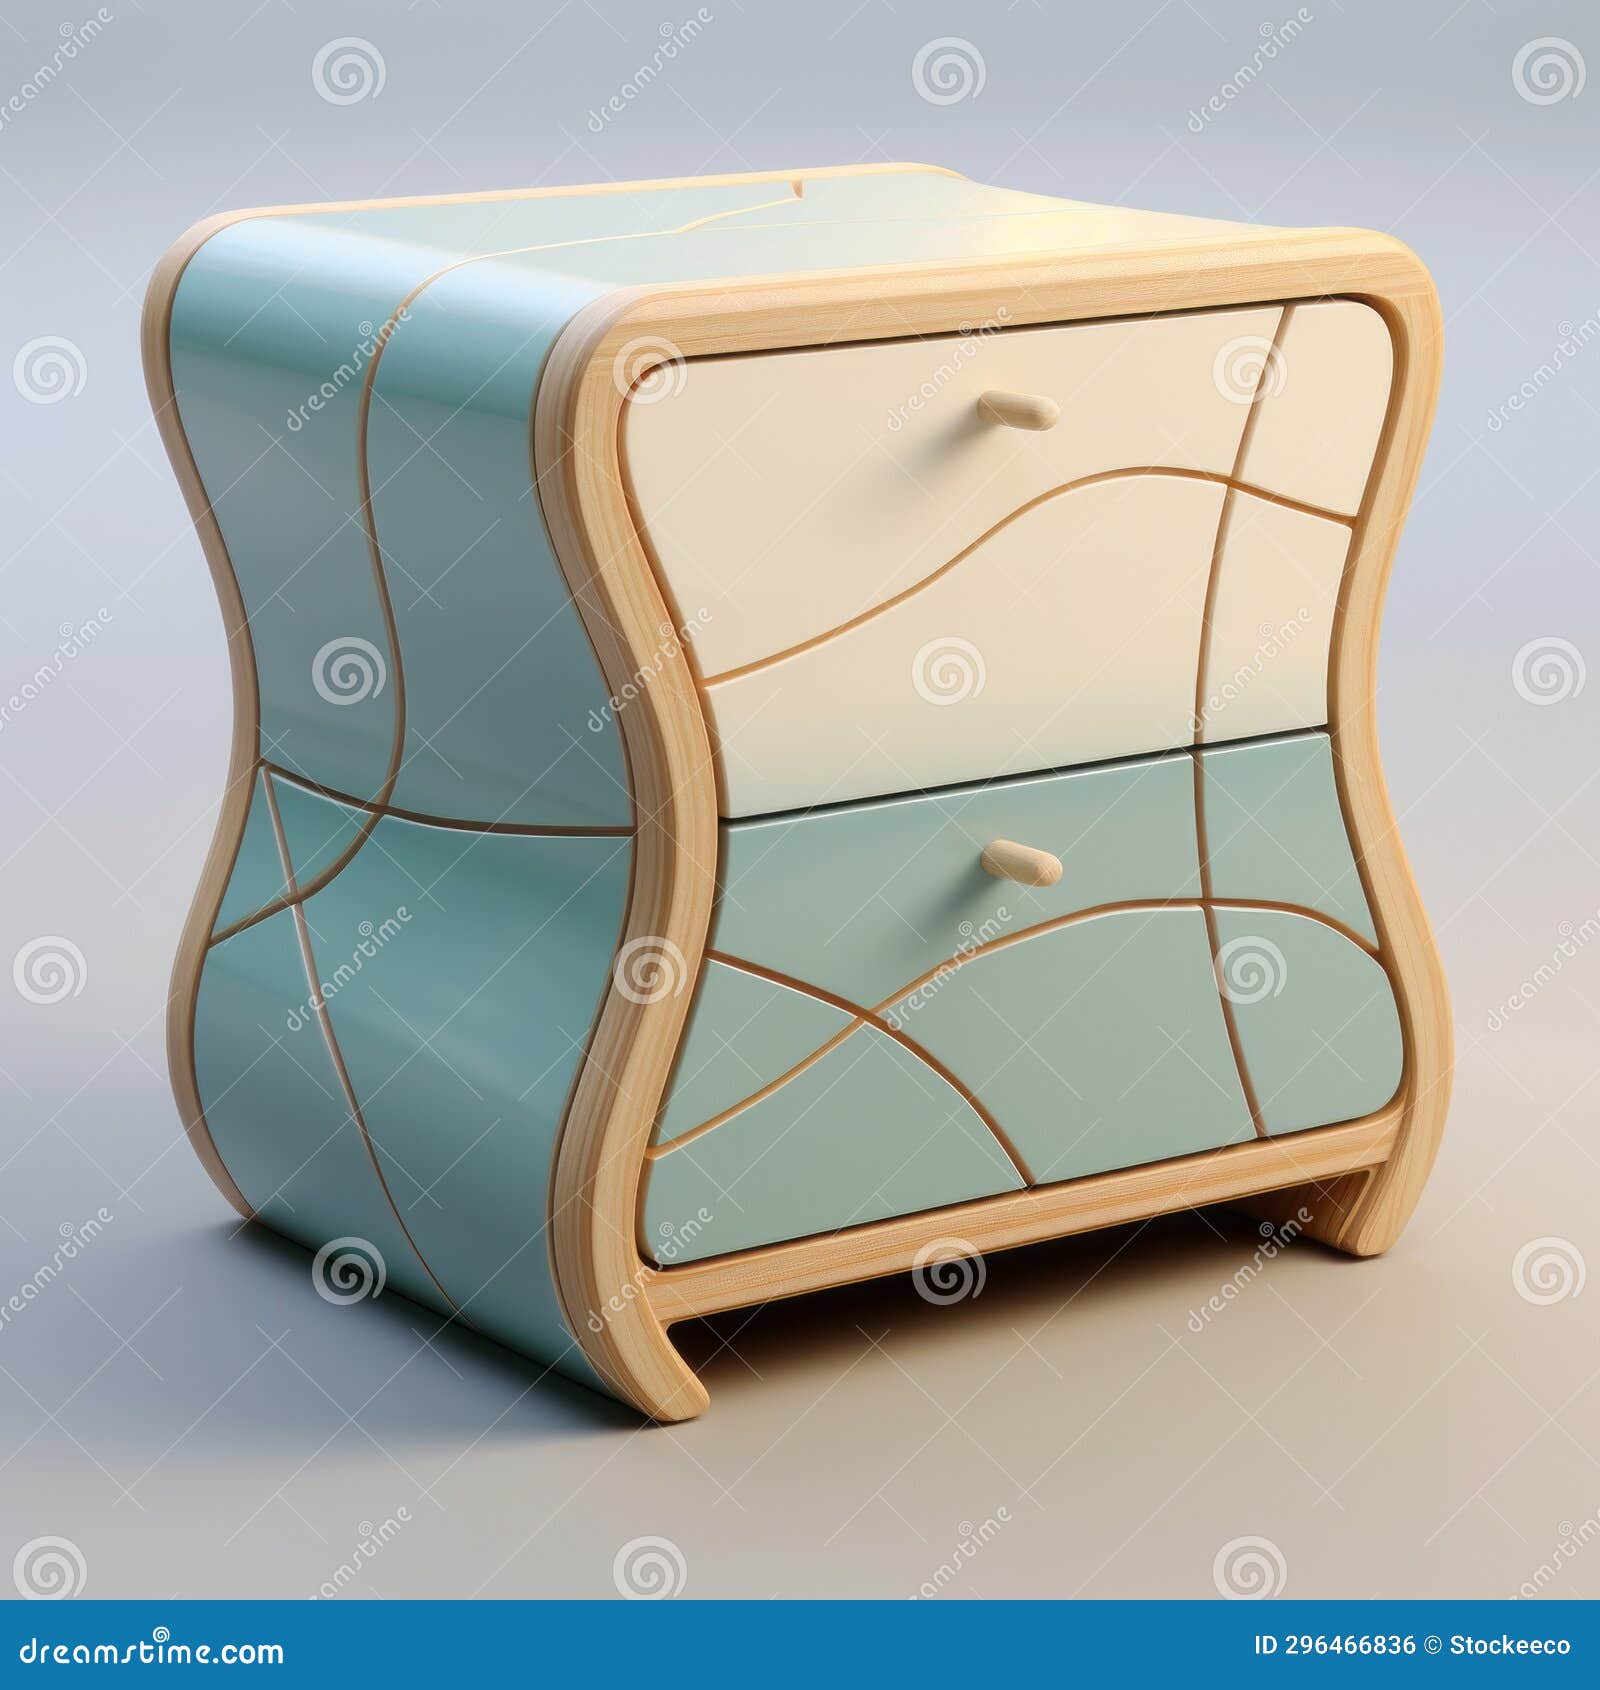 colorful curves nightstand with drawers - cyan and beige